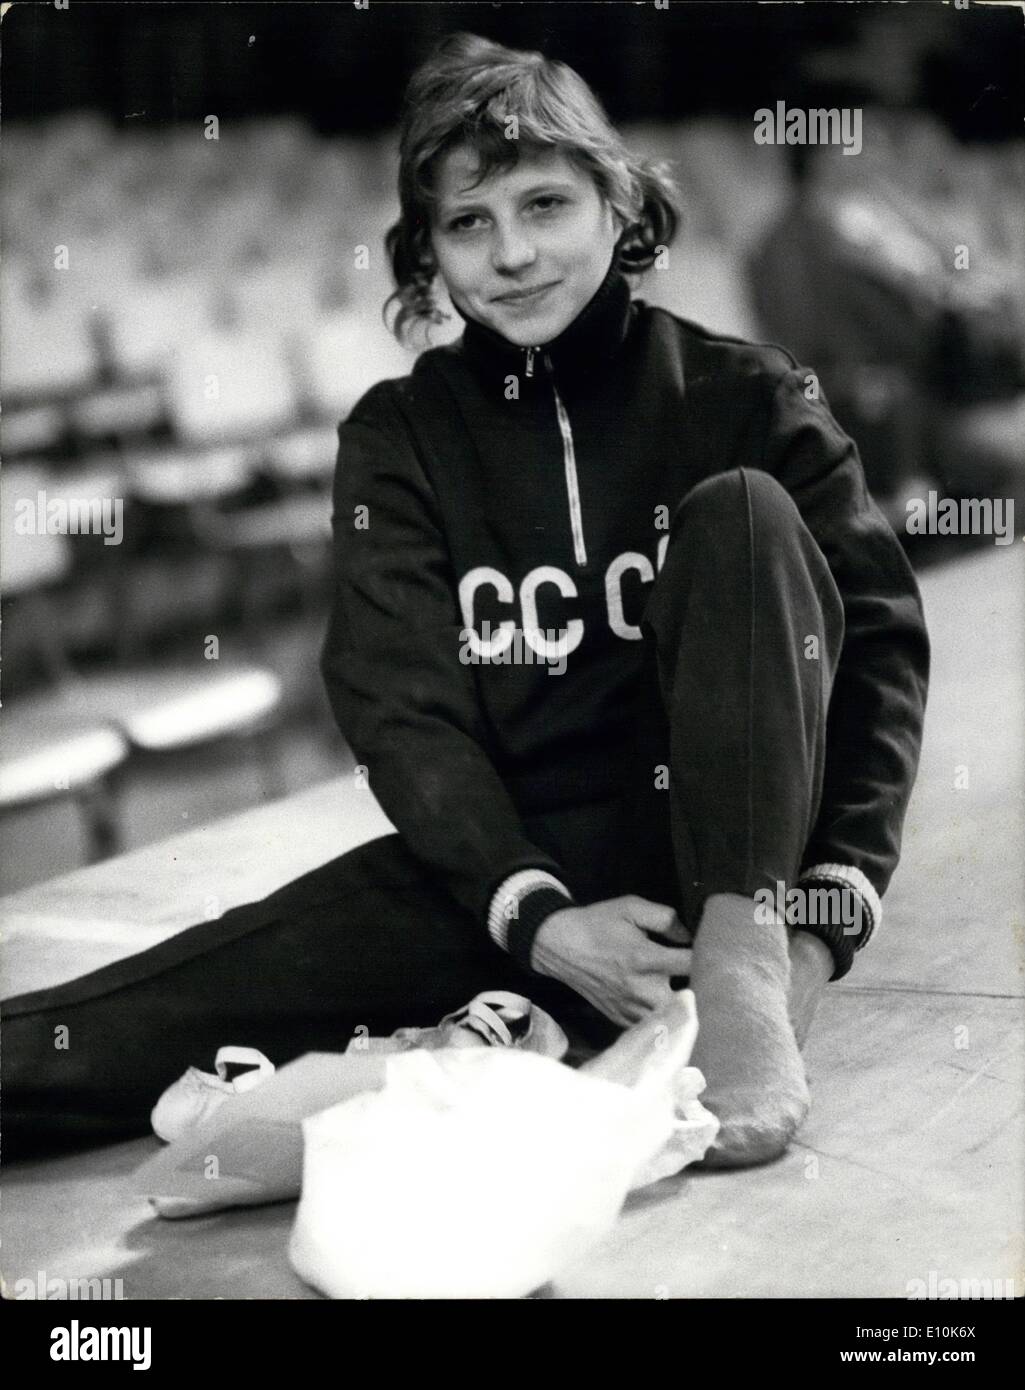 May 05, 1973 - Soviet Gymnasts prepare for their appearance at Earls Court this evening: The Soviet gymnastic team who are in London to give five shows organised by the British Amateur Gymnastics Association, and sponsored by the London Daily Mirror, at Earls Court, were today limbering up for their first performance there this evening. Photo shows Little Olga Korbut, a member of the Russian team, and the Golden girl of gymnastics, adjusting her shoes before a practice session at Earls Court today. Stock Photo